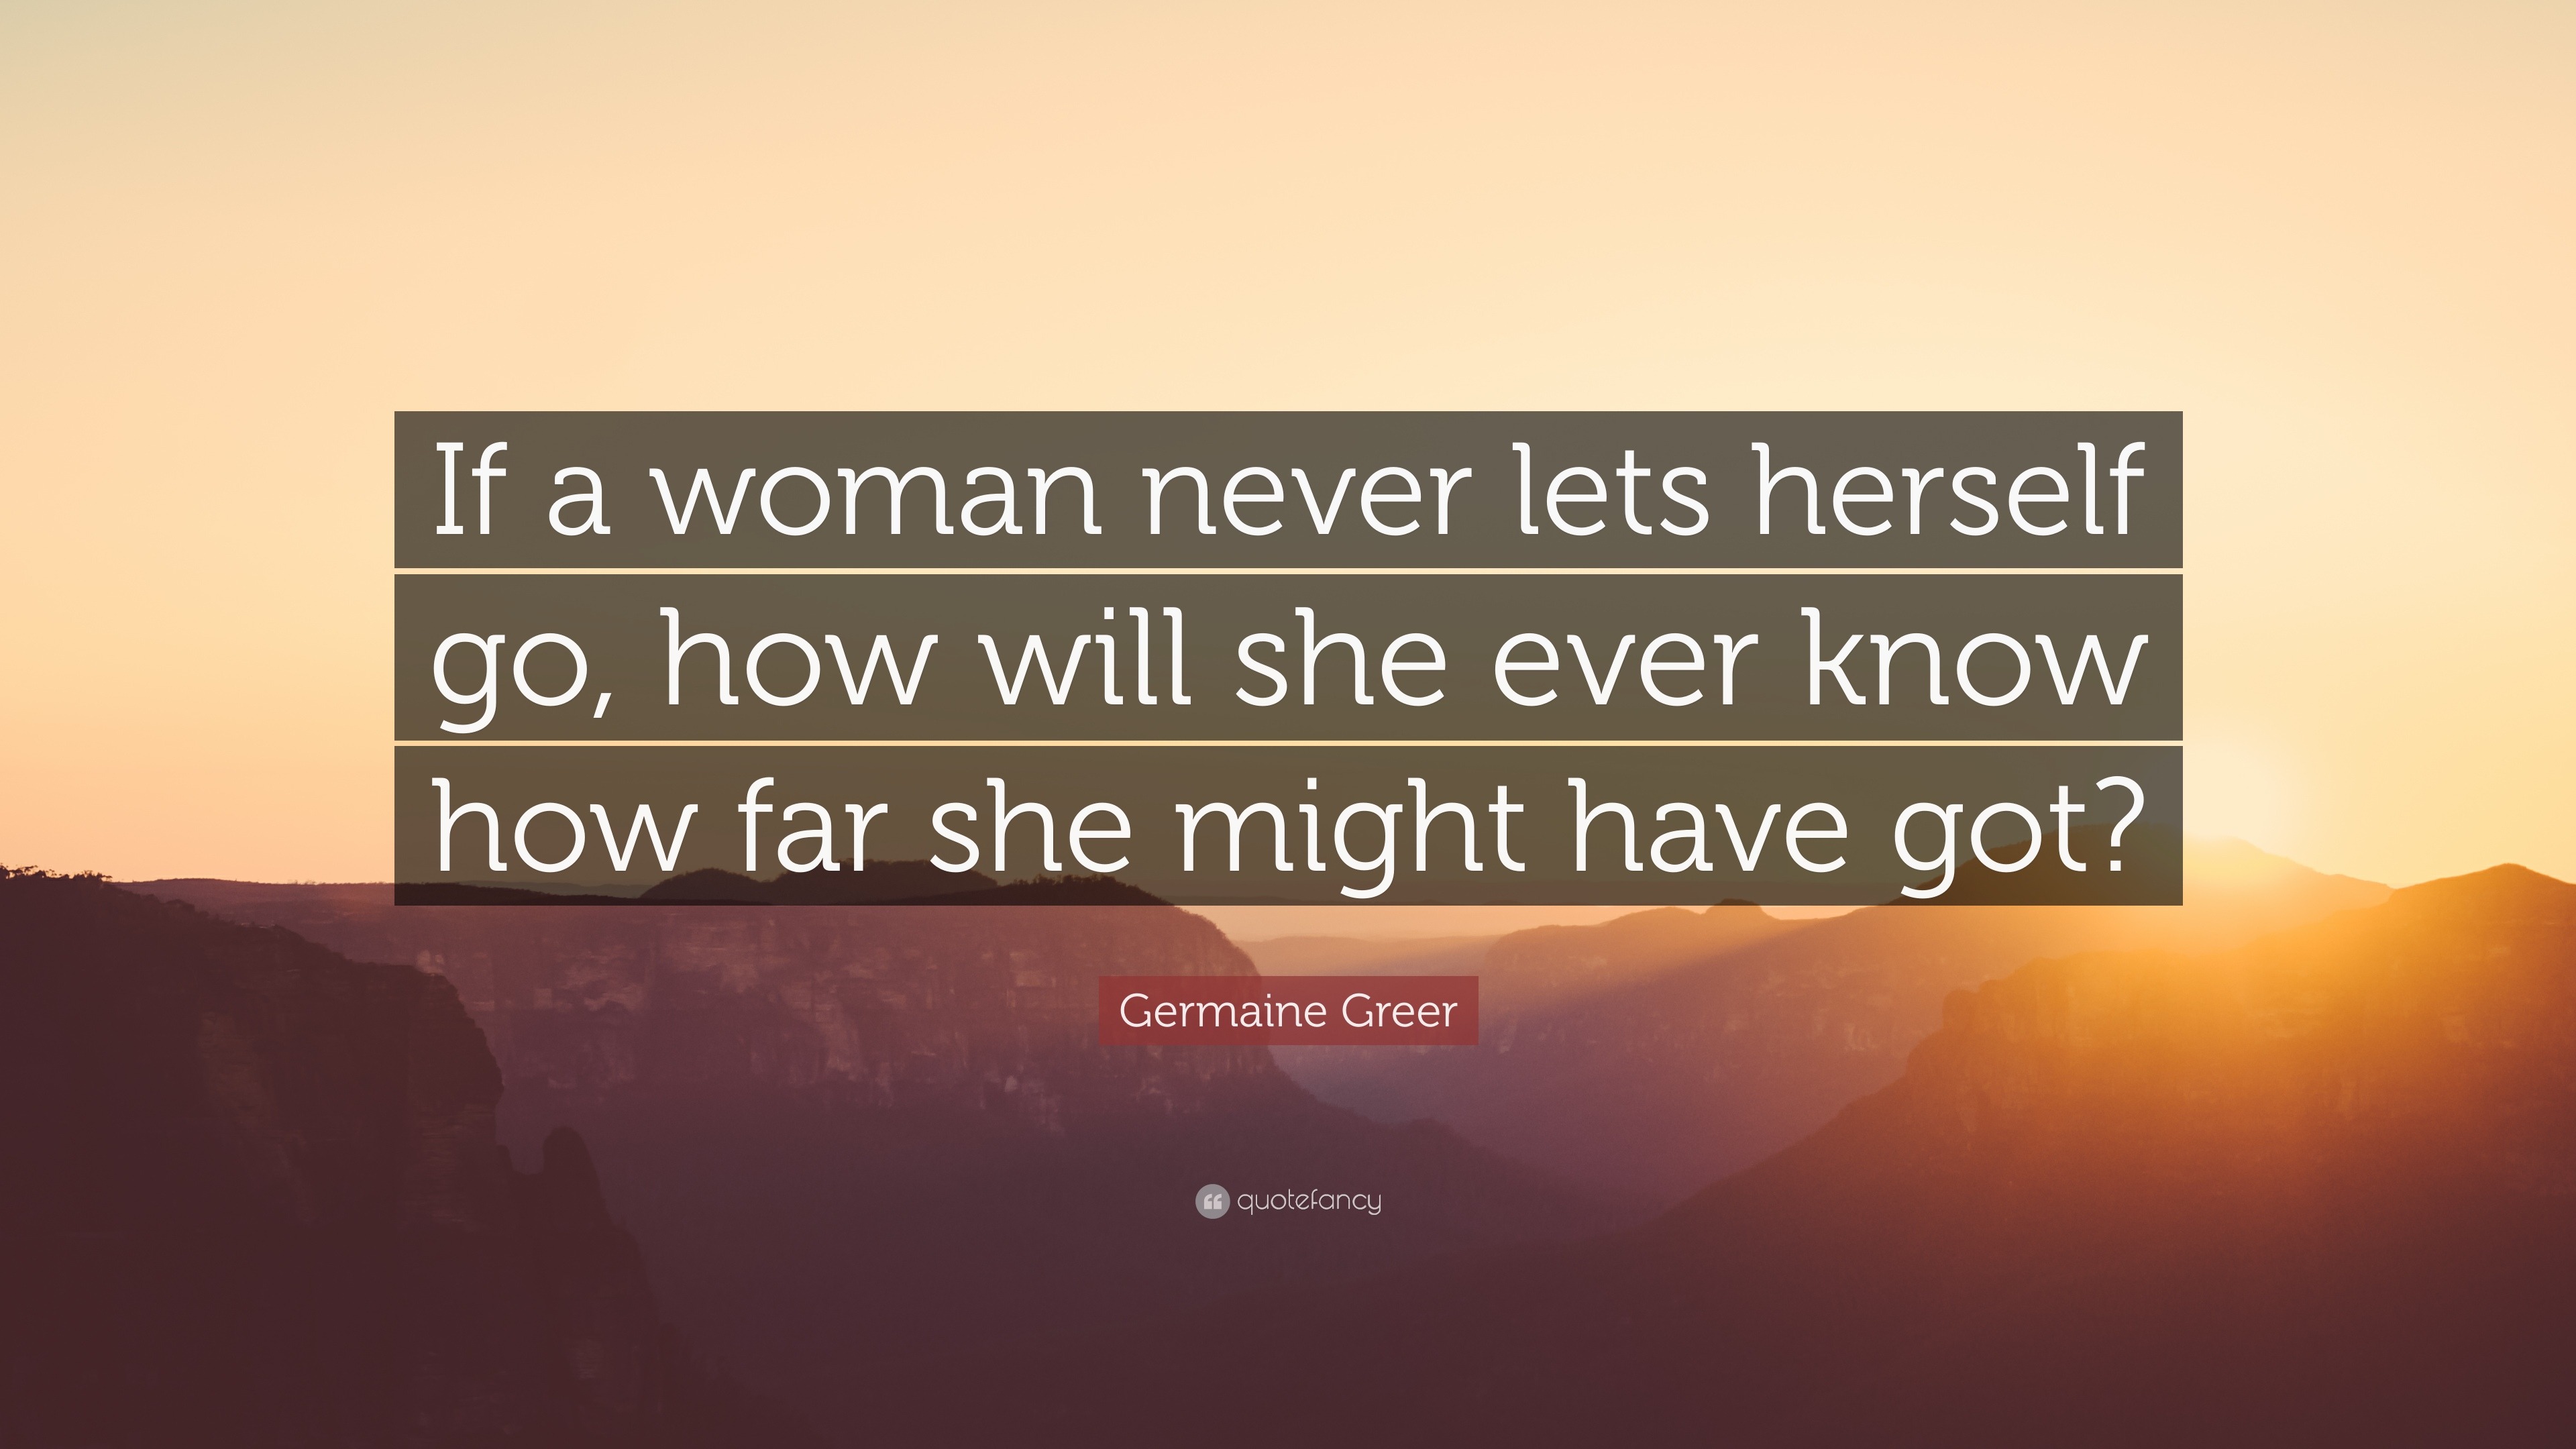 Germaine Greer Quote: “If a woman never lets herself go, how will she ...